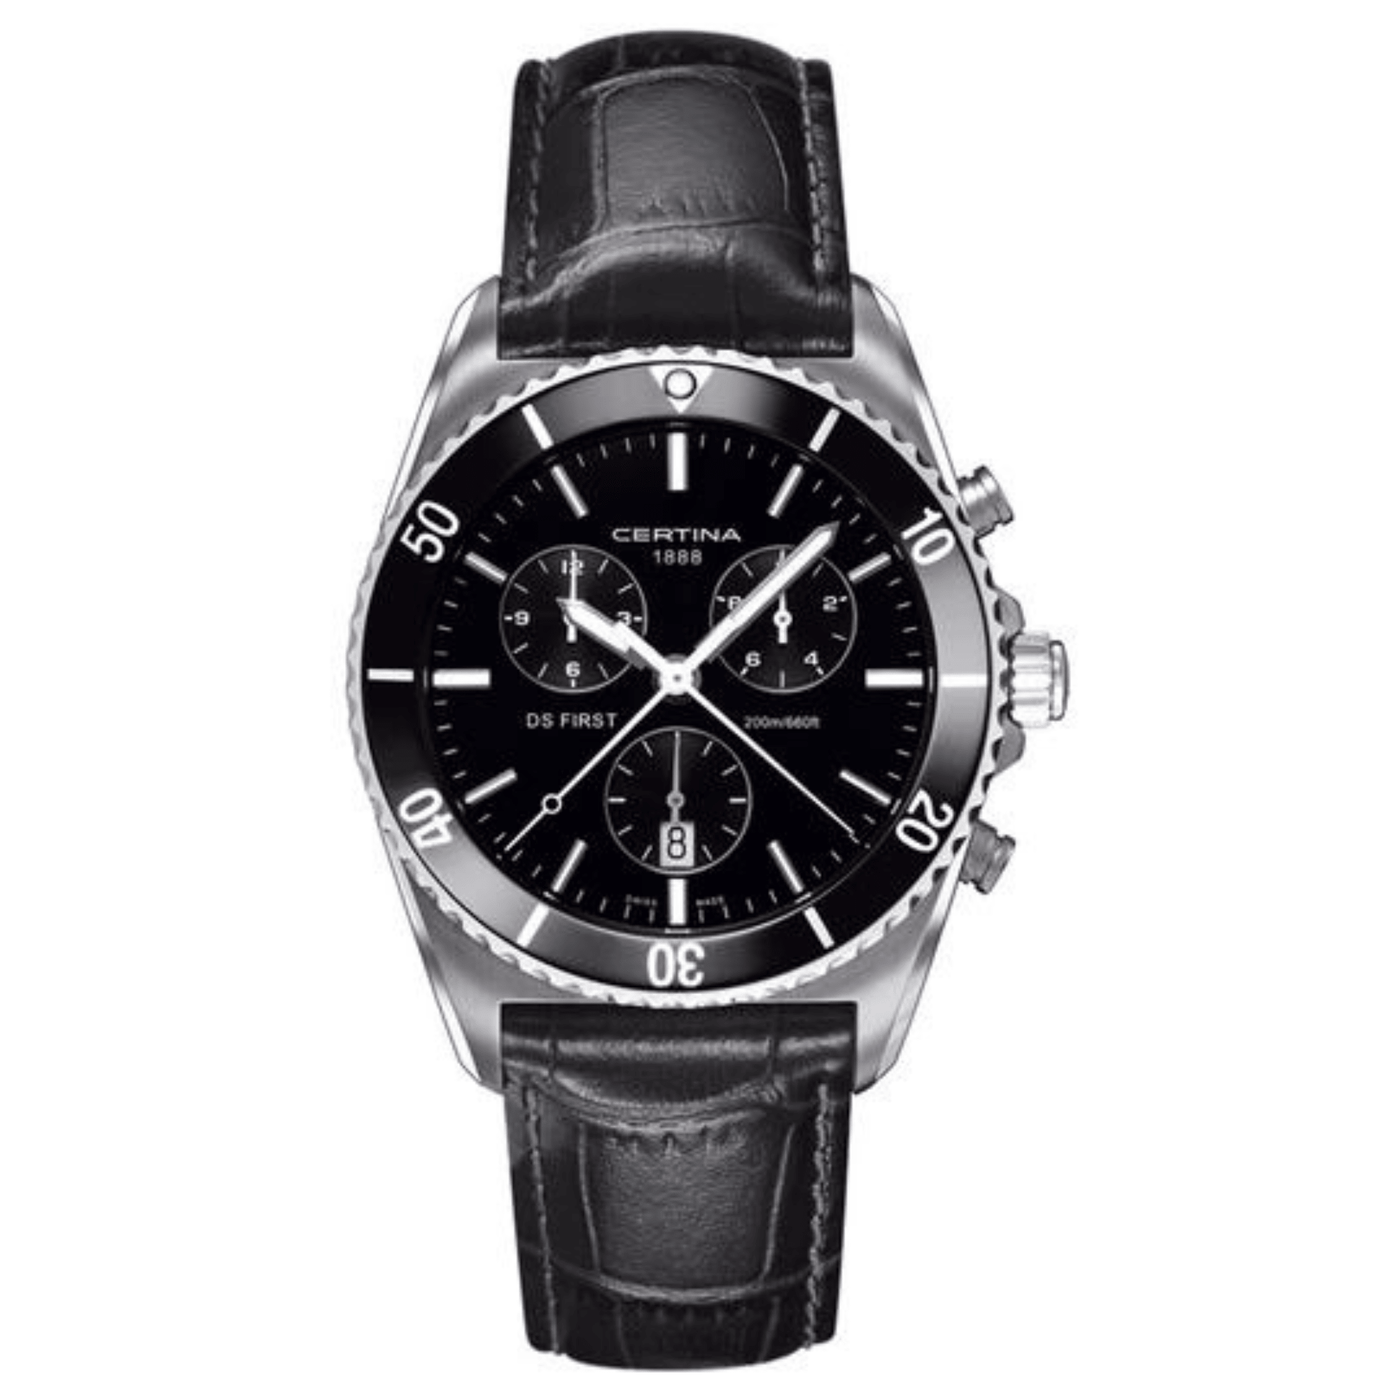 DS First Ceramic Chronograph